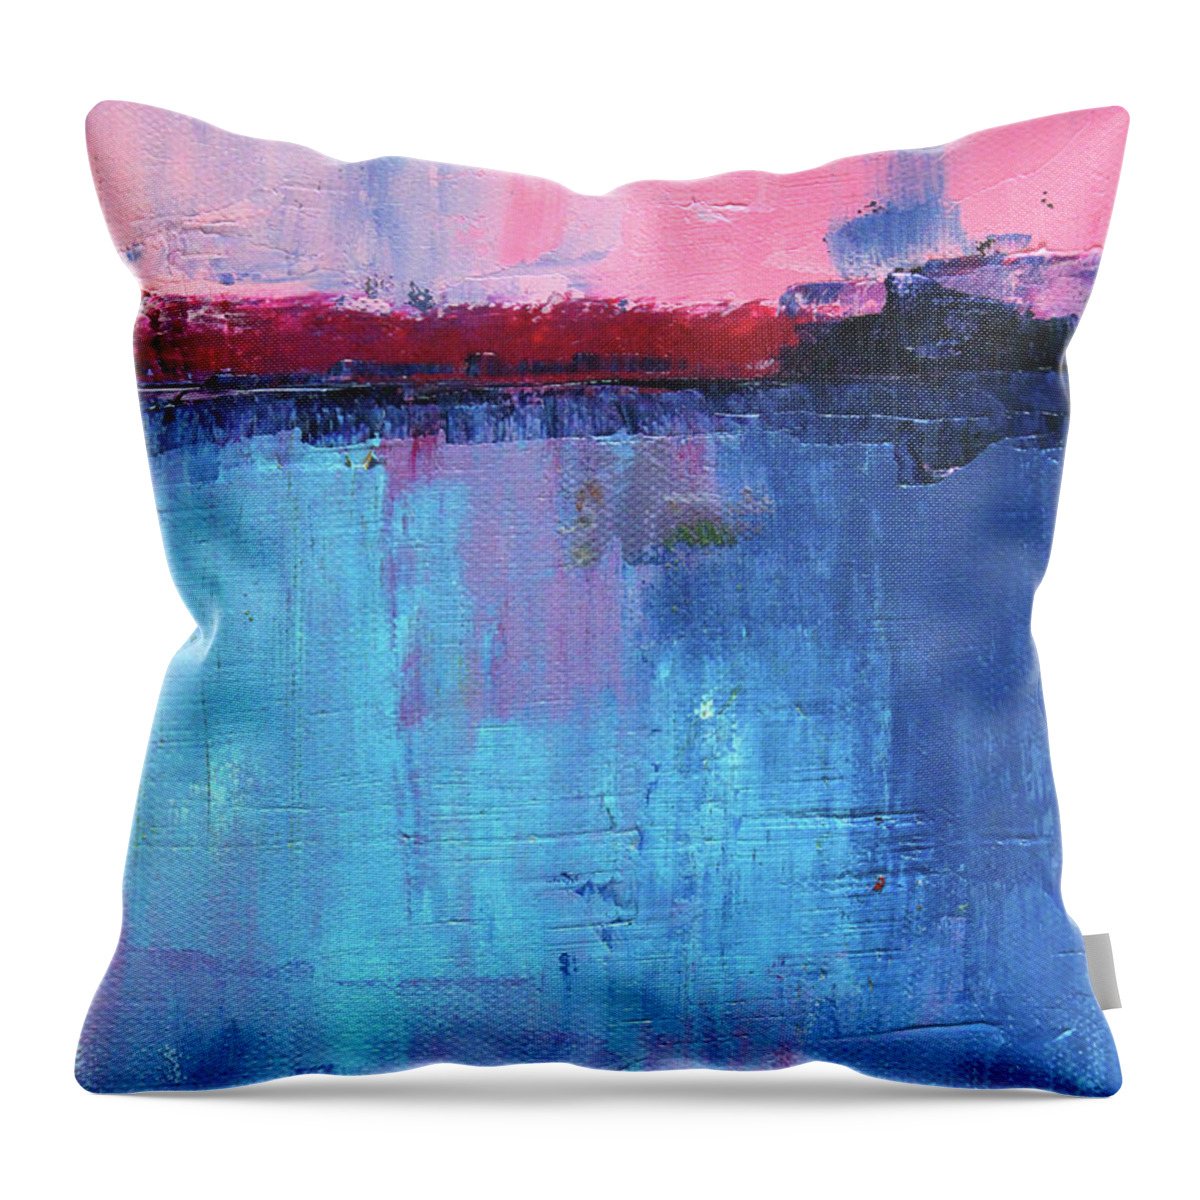 Sunrise Throw Pillow featuring the painting Pink Sunrise Abstract by Nancy Merkle